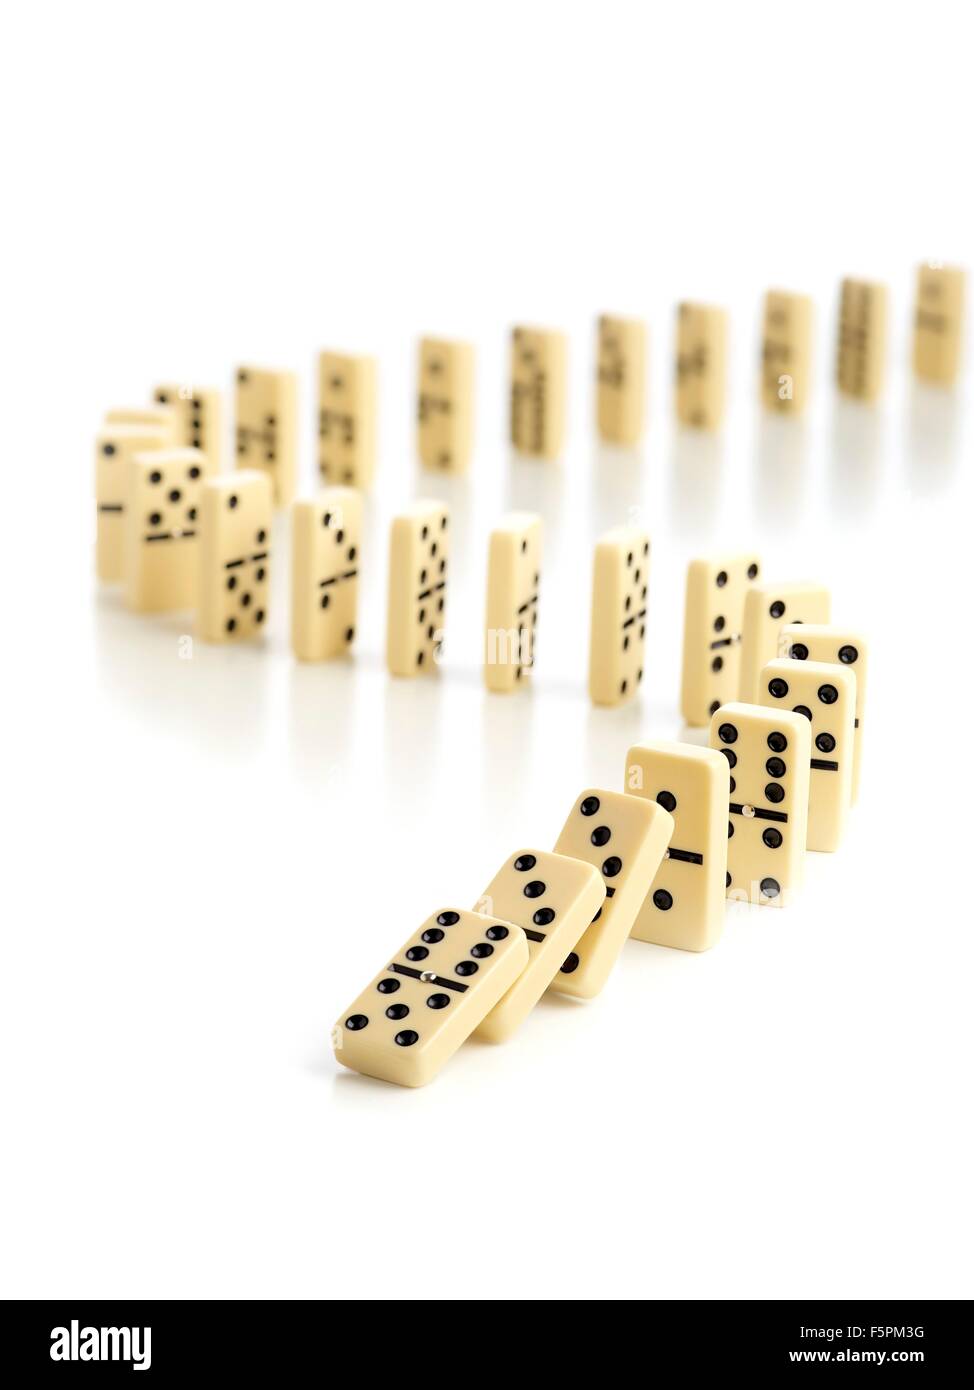 Dominoes falling down against a white background. Stock Photo